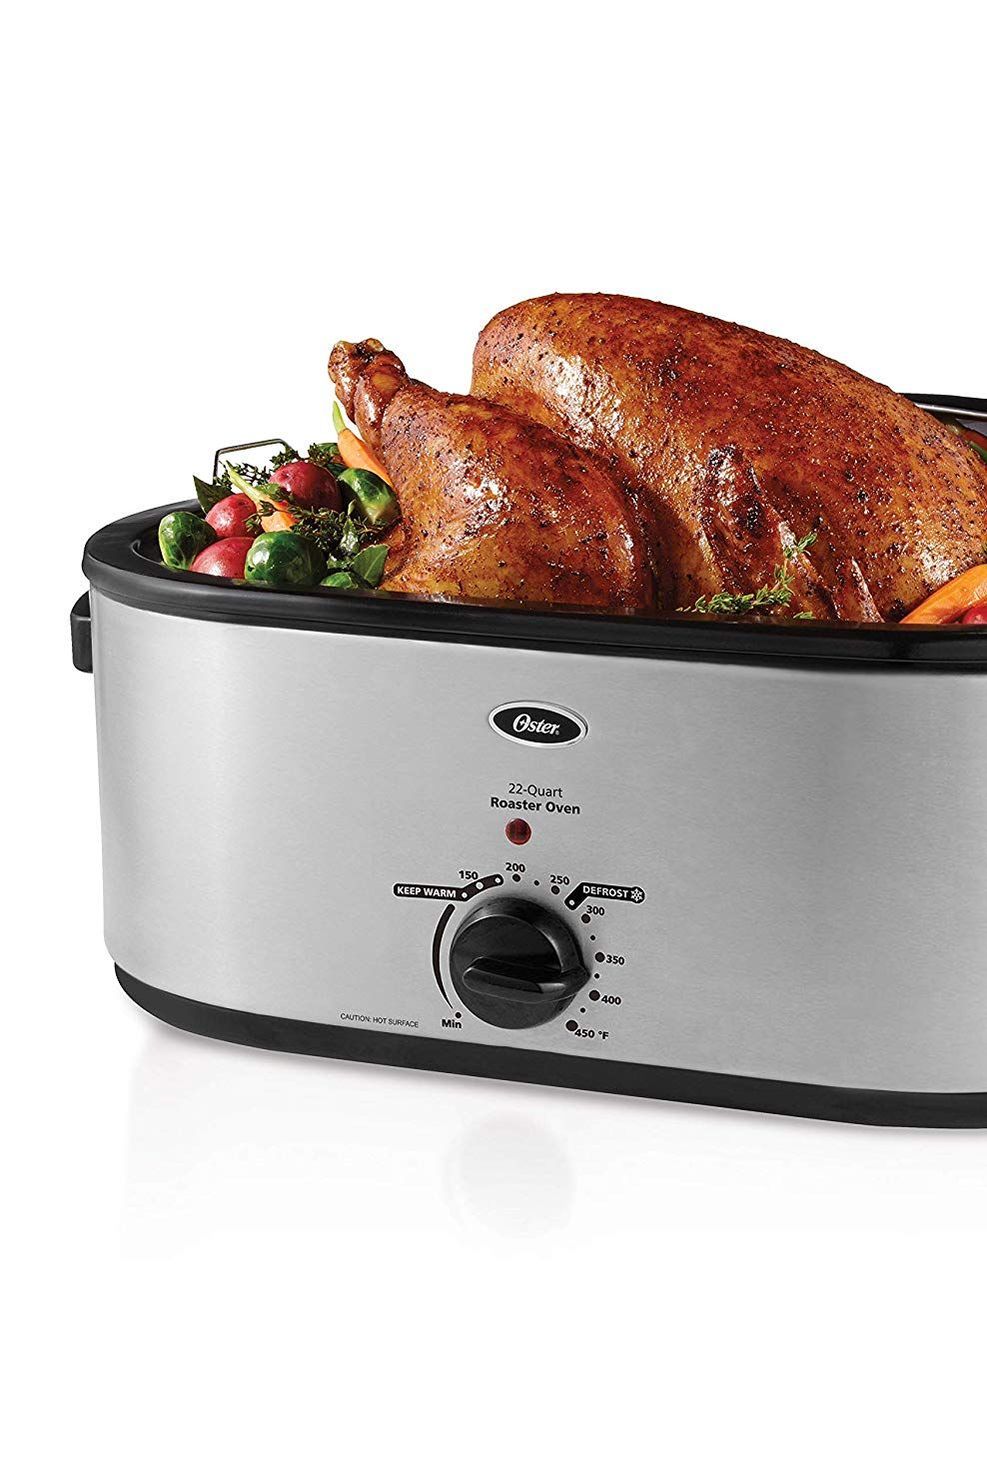 Oster Roaster Oven with Self-Basting Lid - AMAZON Bestseller for #Thanksgiving